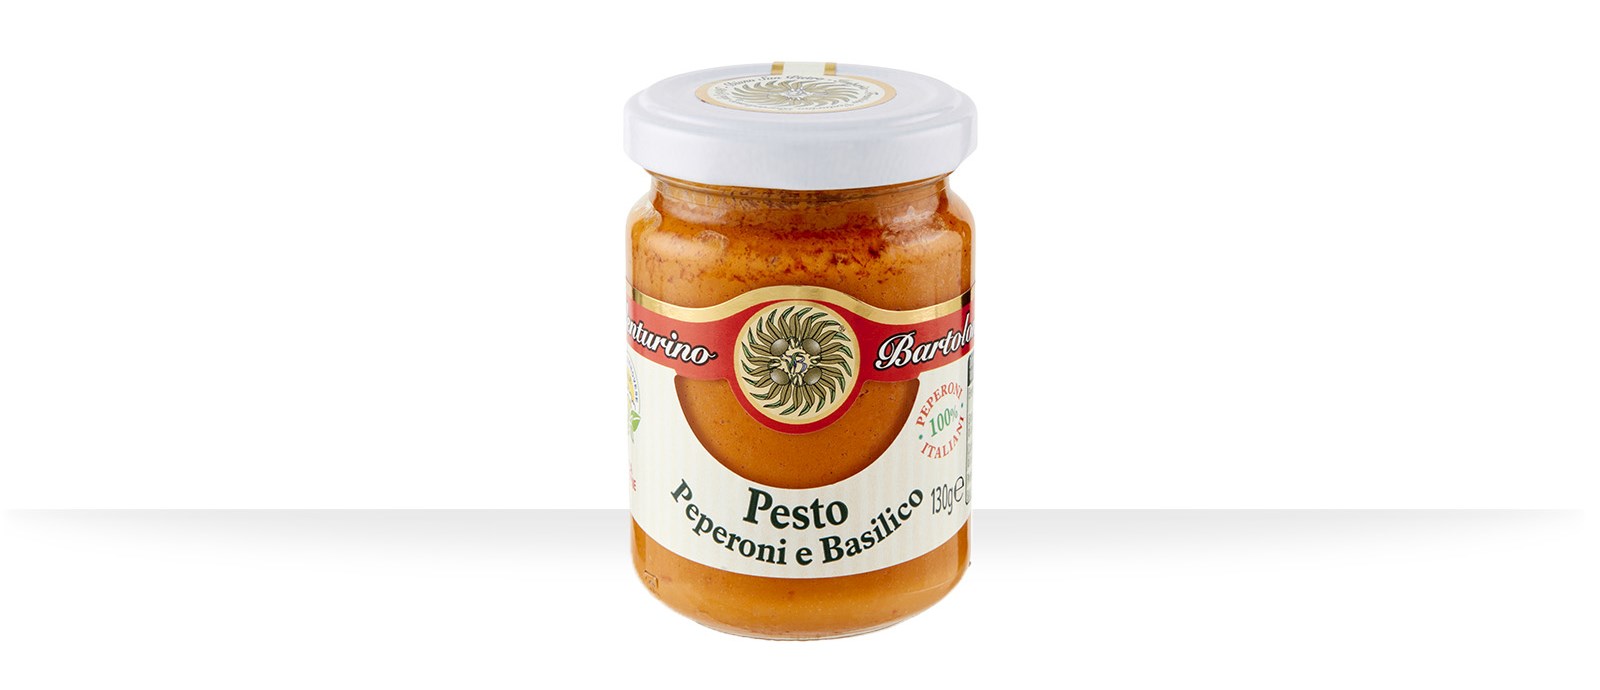 Pesto with Genoese Basil PDO & Italian peppers